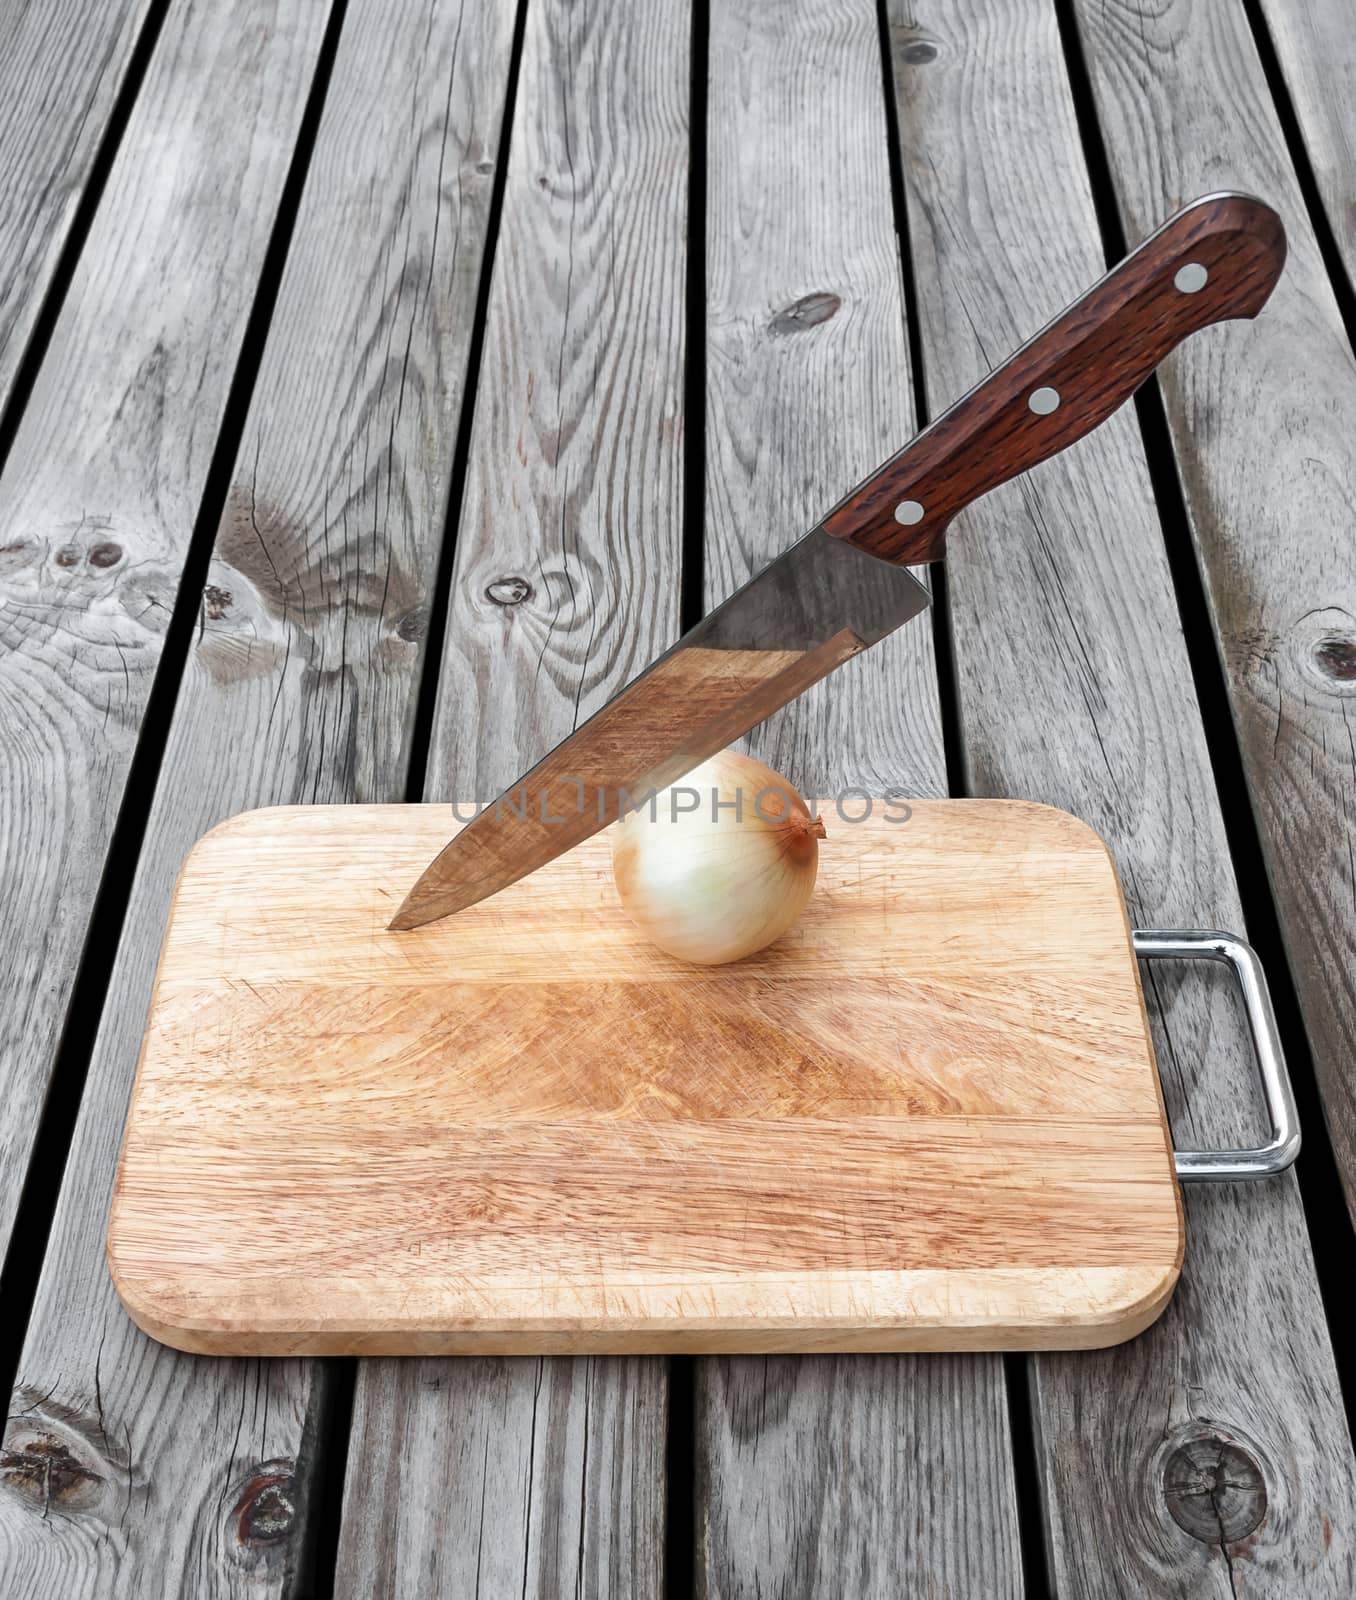 Knife,onion and a cutting board  on  wooden table by zeffss